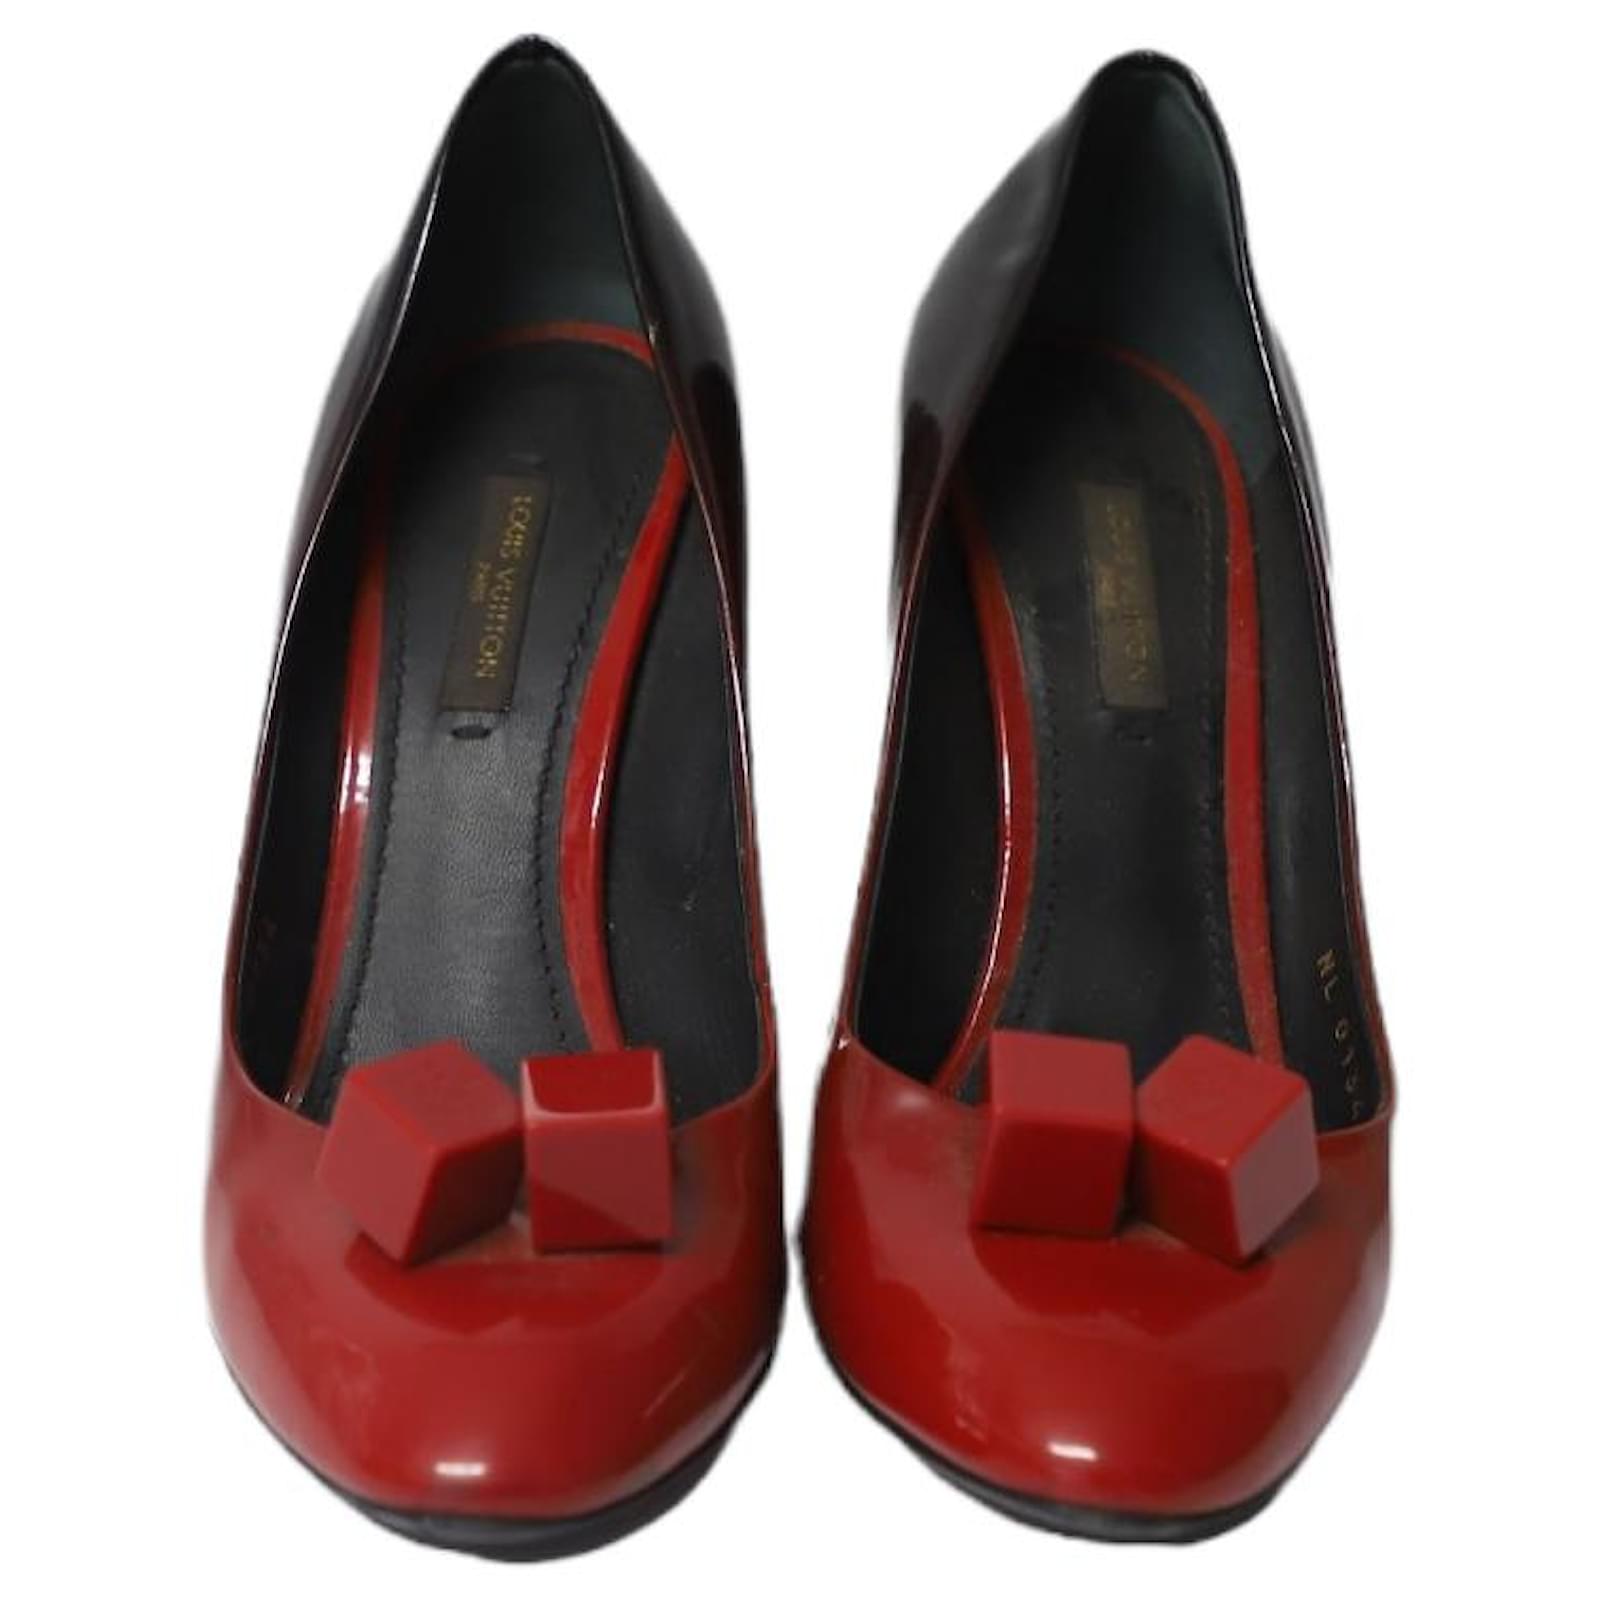 Louis Vuitton Red/Black Ombre Patent Leather Flat Sandals Size 39